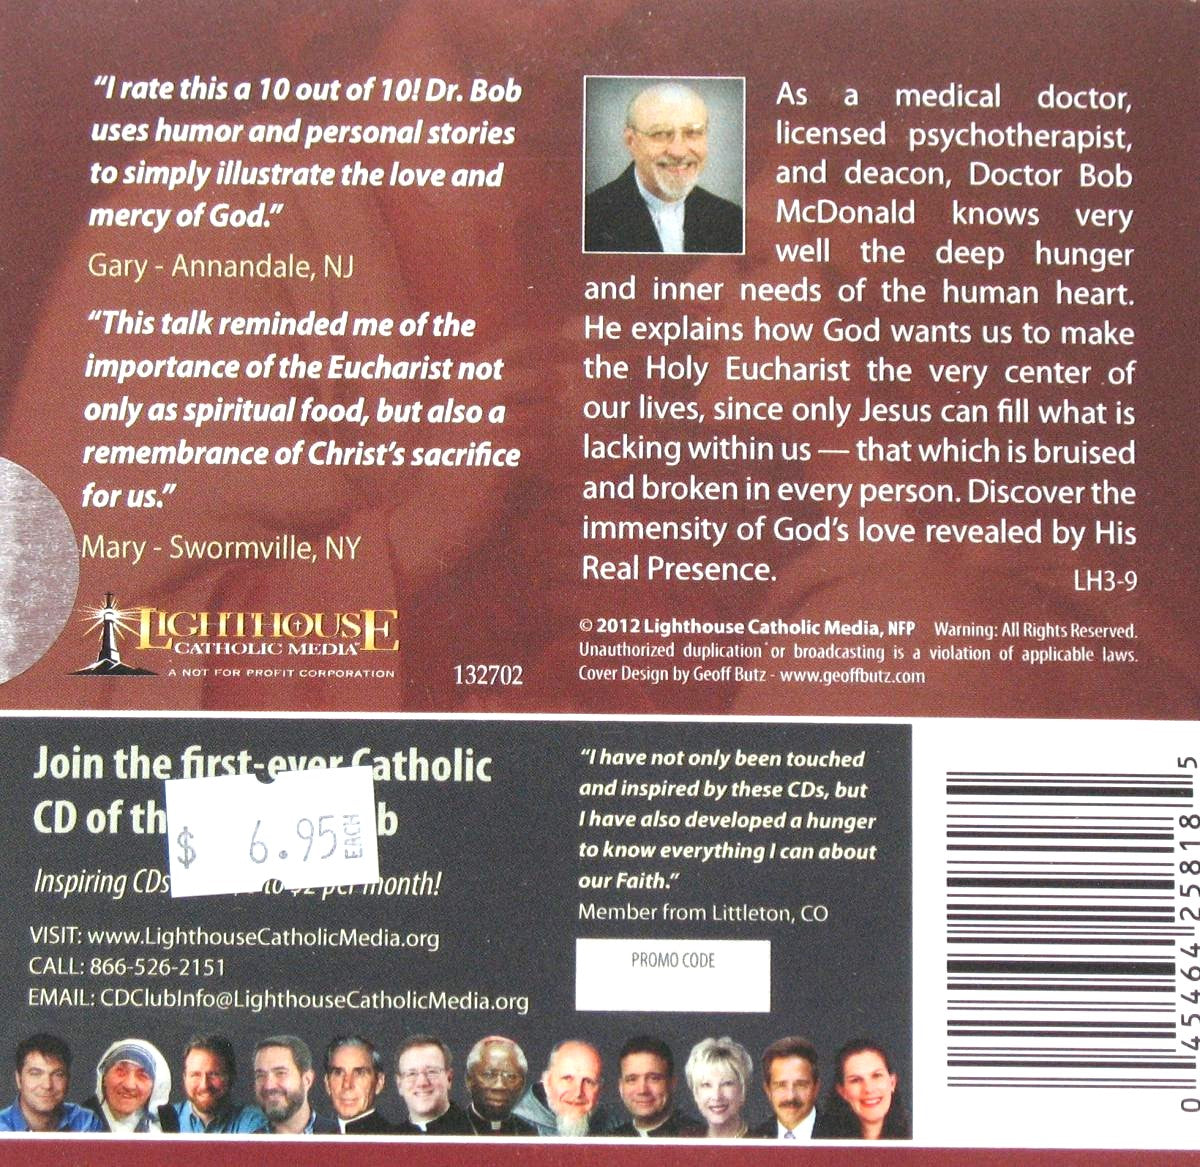 The Eucharist: Our Very Life - CD Talk by Deacon Dr. Bob McDonald